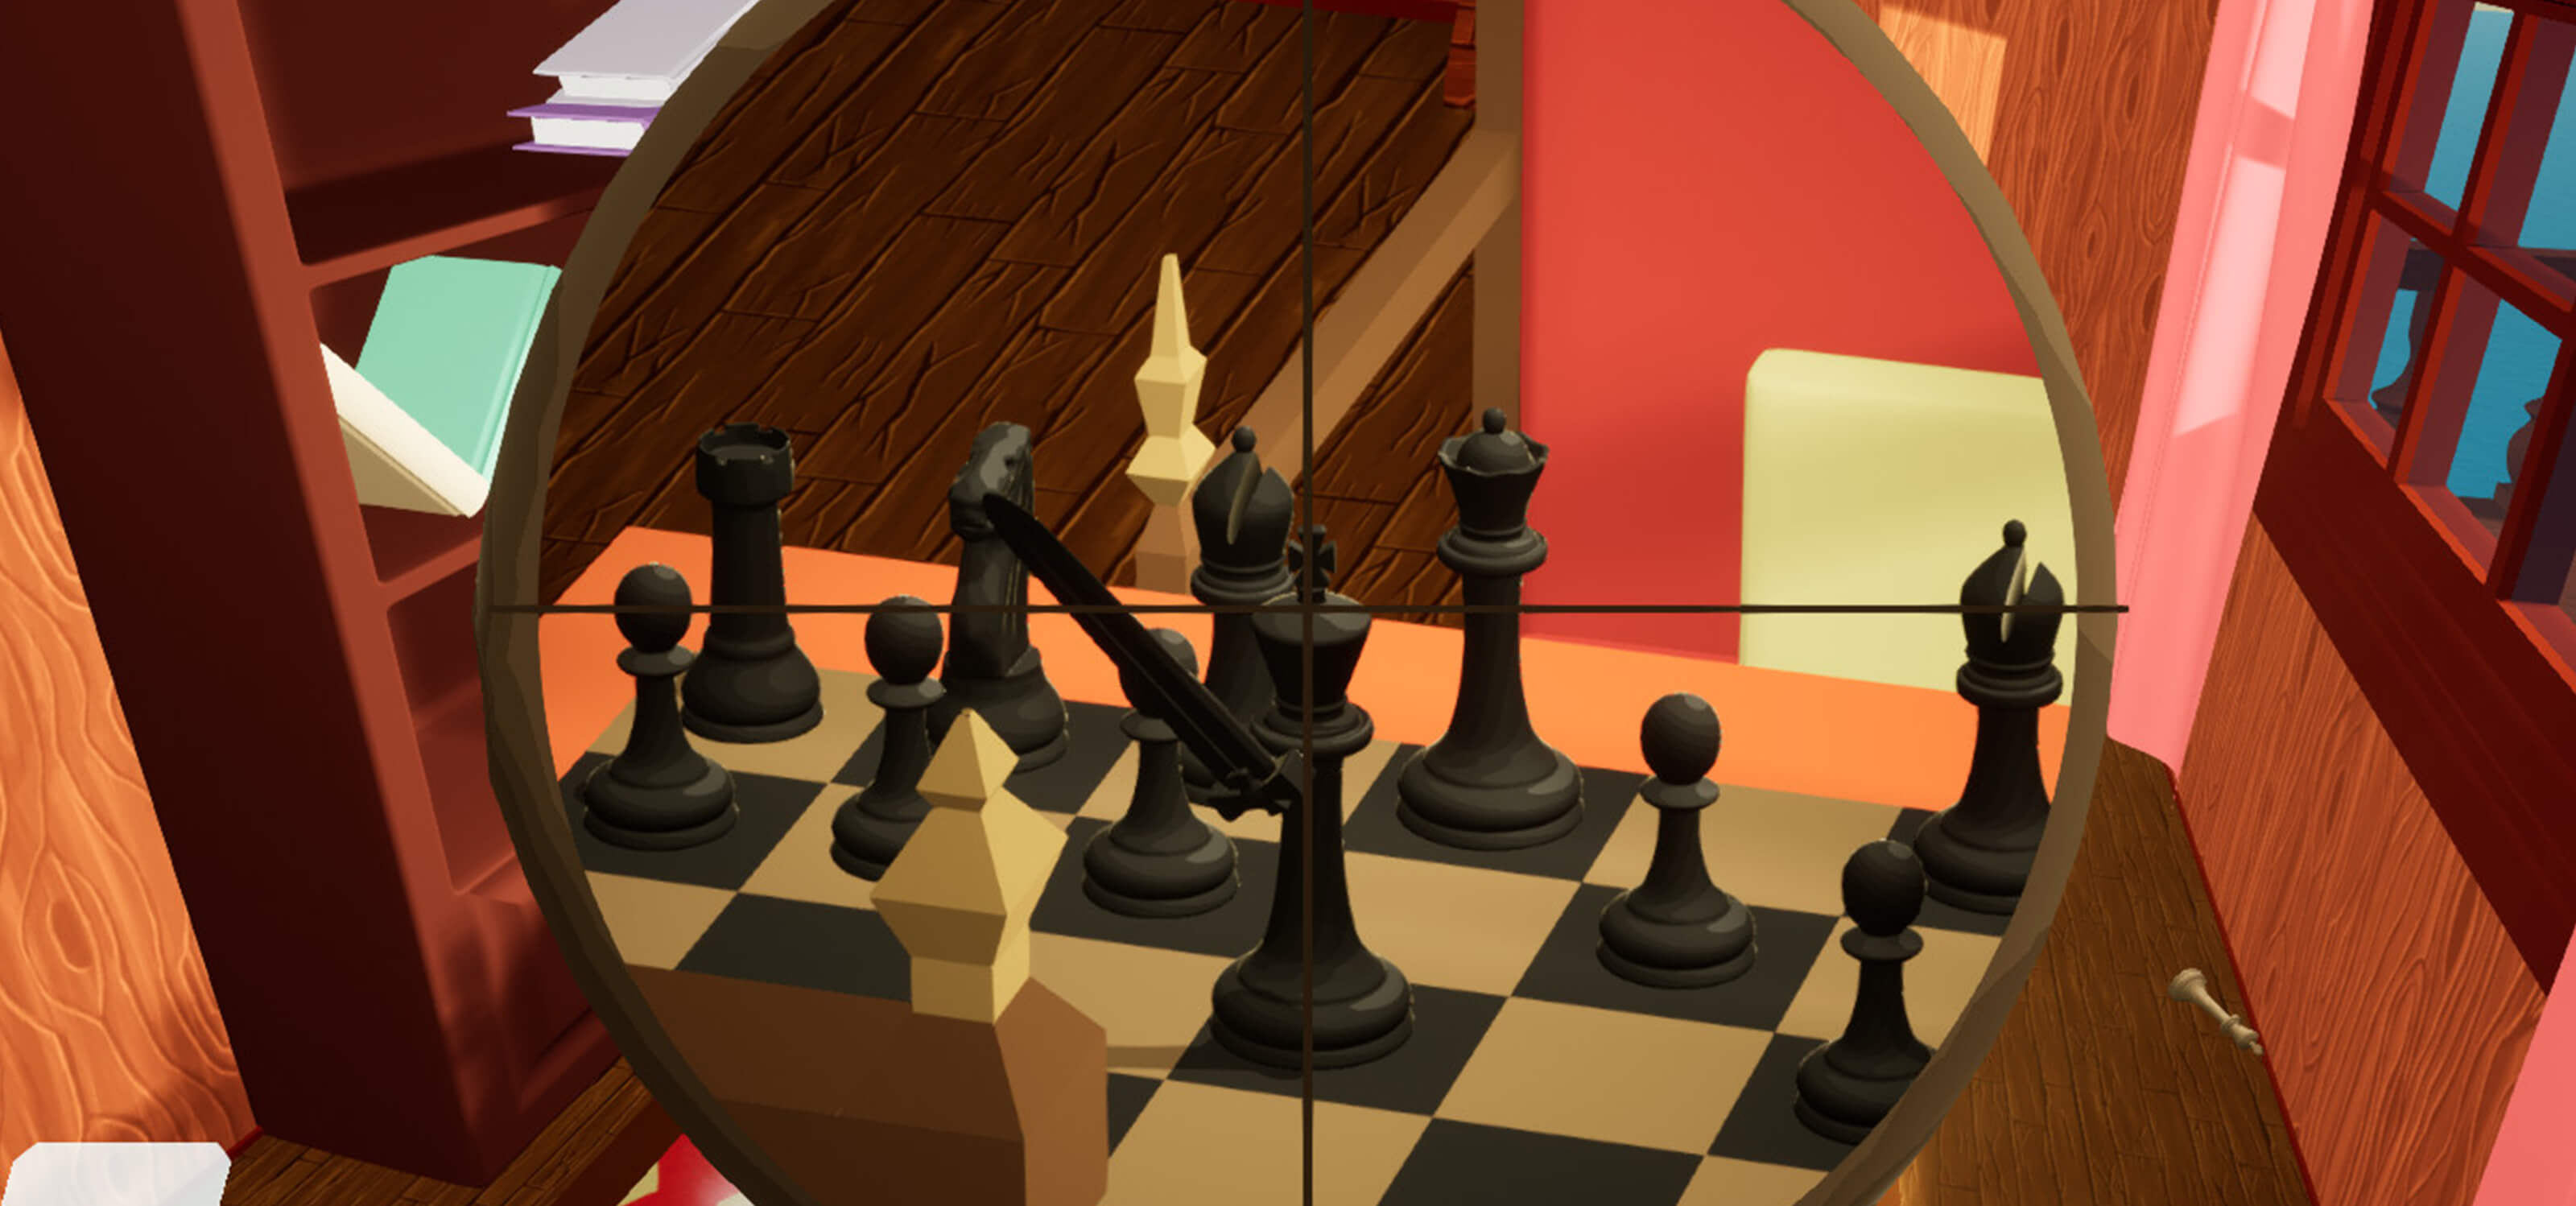 It's International Chess Day. How well do you know the game